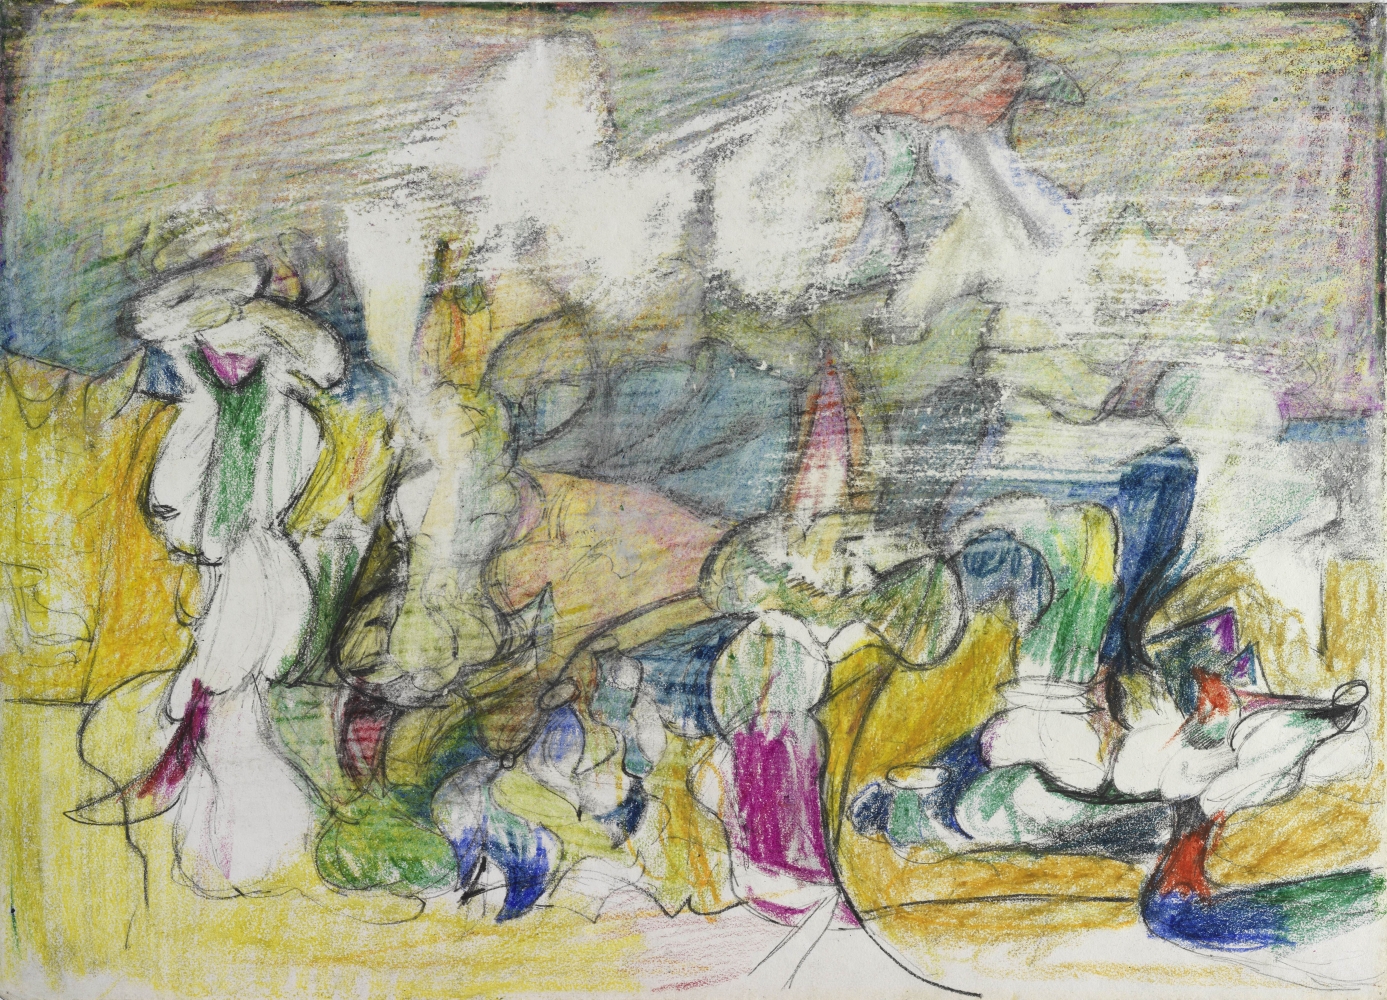 Virginia Landscape, c. 1944, crayon and graphite pencil on paper, 18 1/2 x 23 5/8 in. (47 x 60 cm). Private collection. [AGCR: D1028]